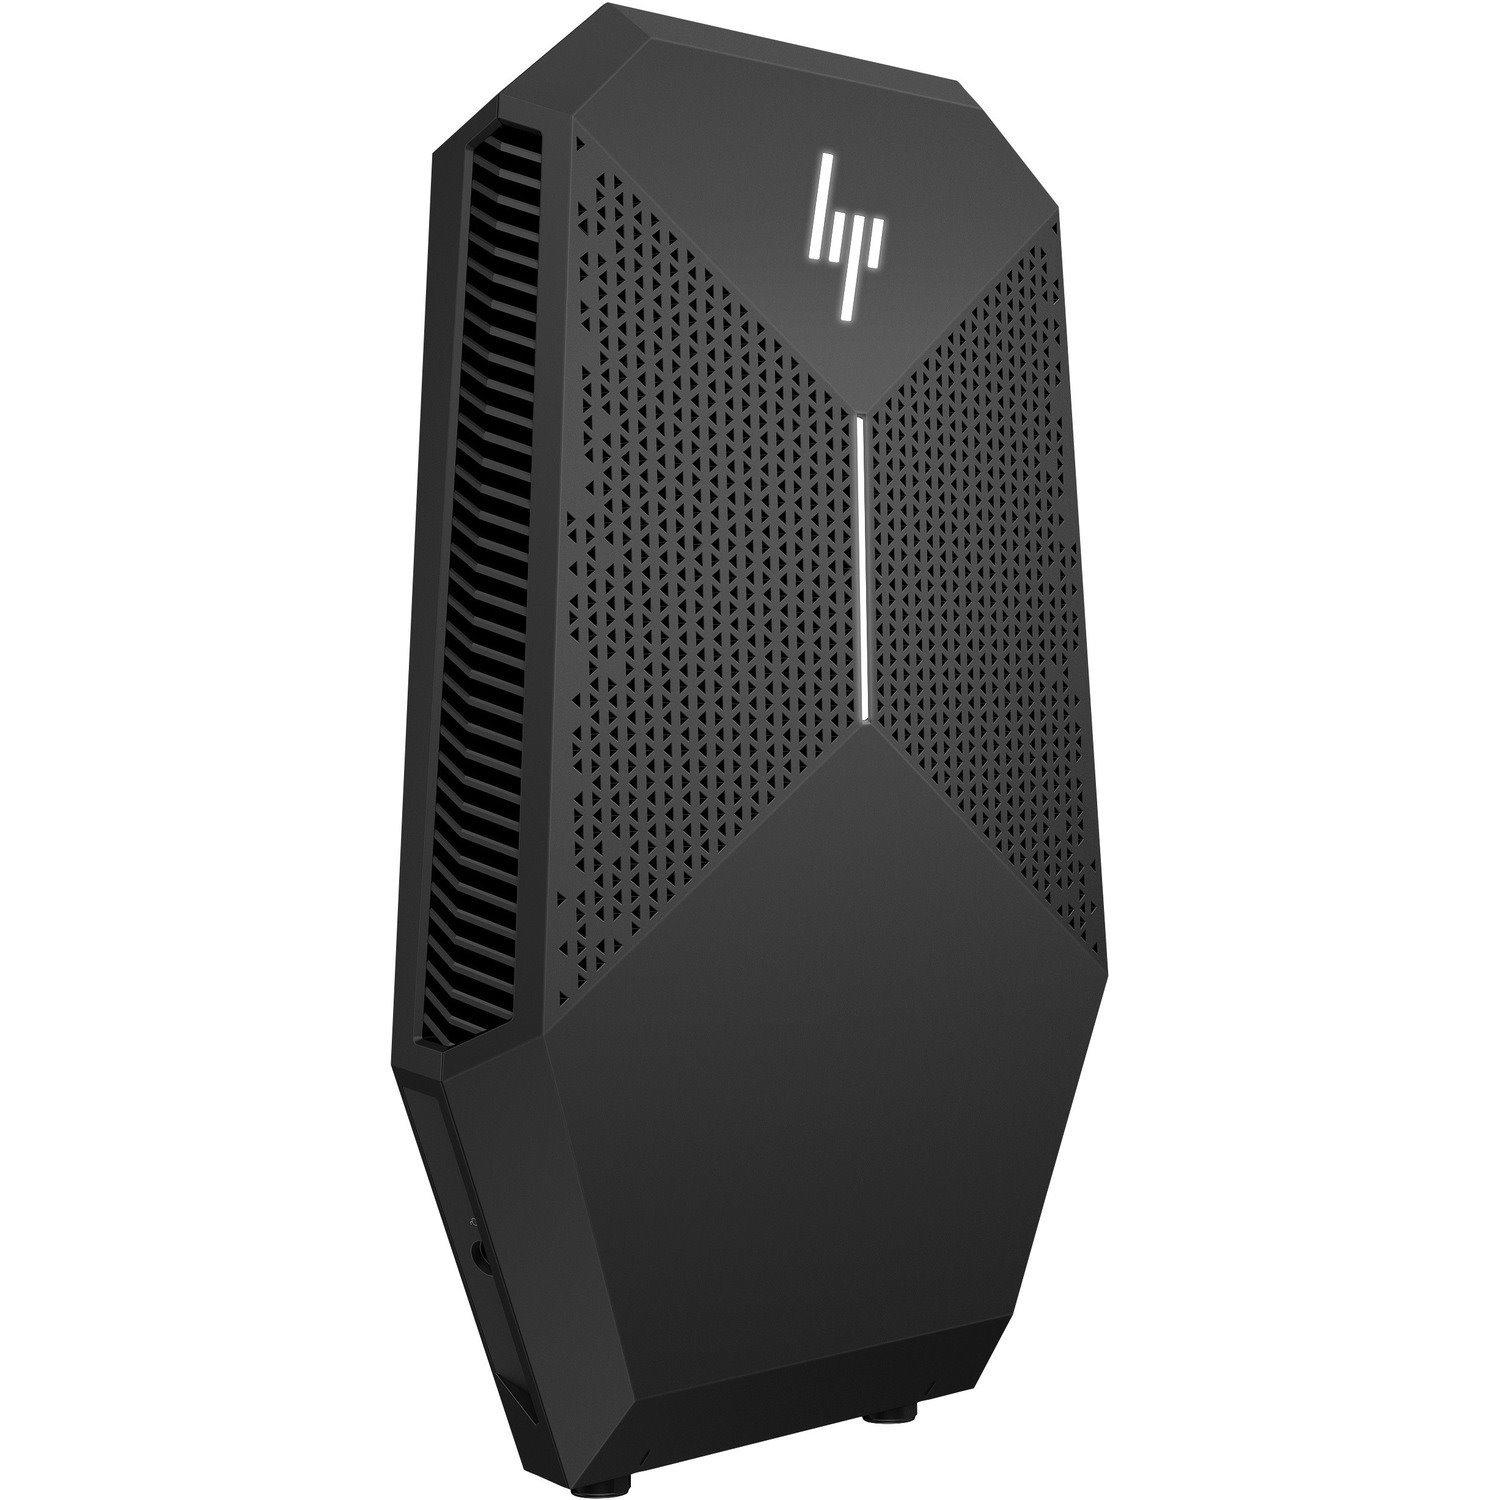 HP Z VR G2 Backpack Workstation - 1 x Intel Core i7 8th Gen i7-8850H - 32 GB - 1 TB SSD - Small Form Factor - Black